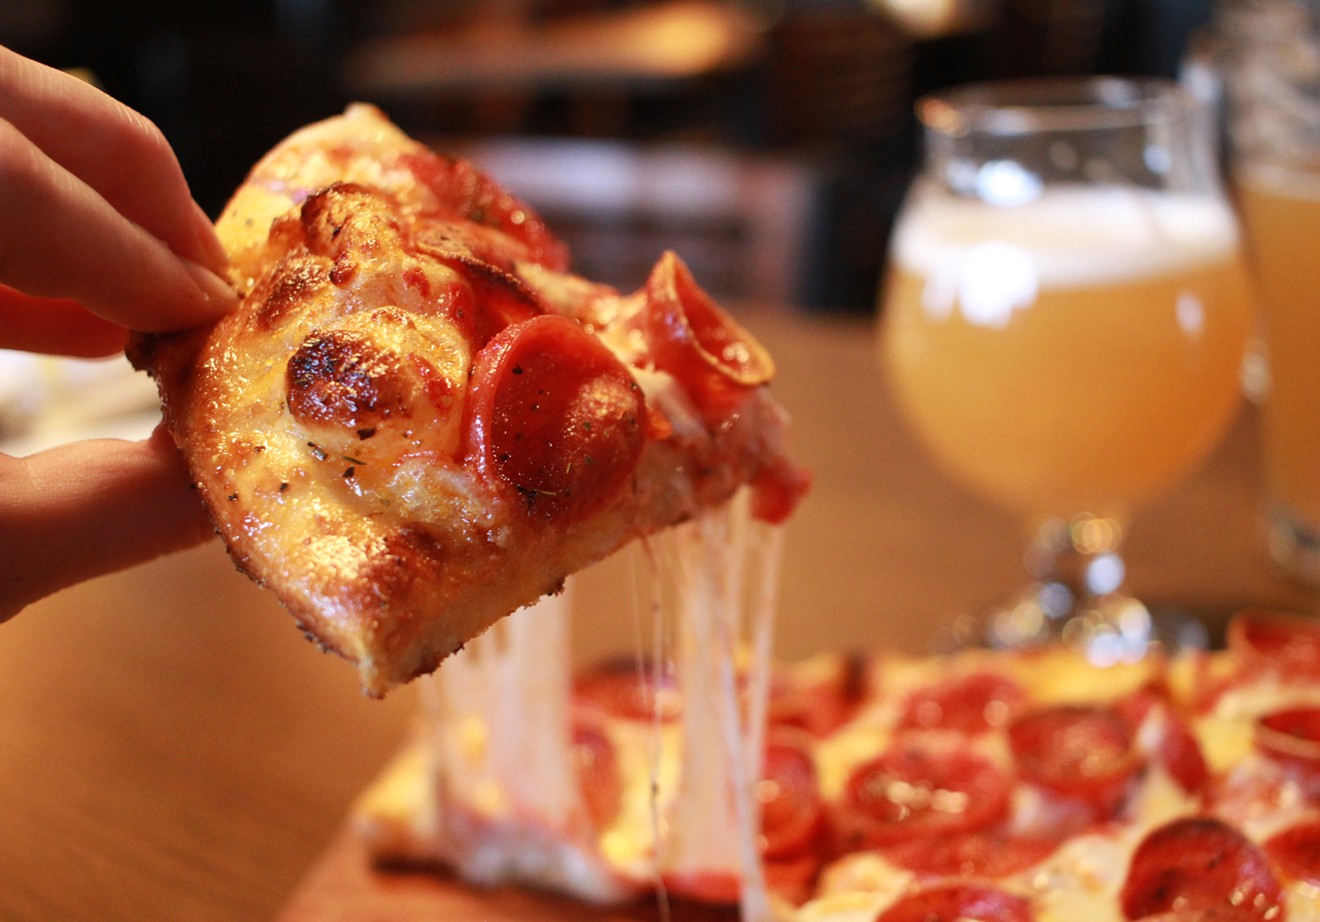 Beer might come first at Freely Taproom & Kitchen, but flatbread comes second.